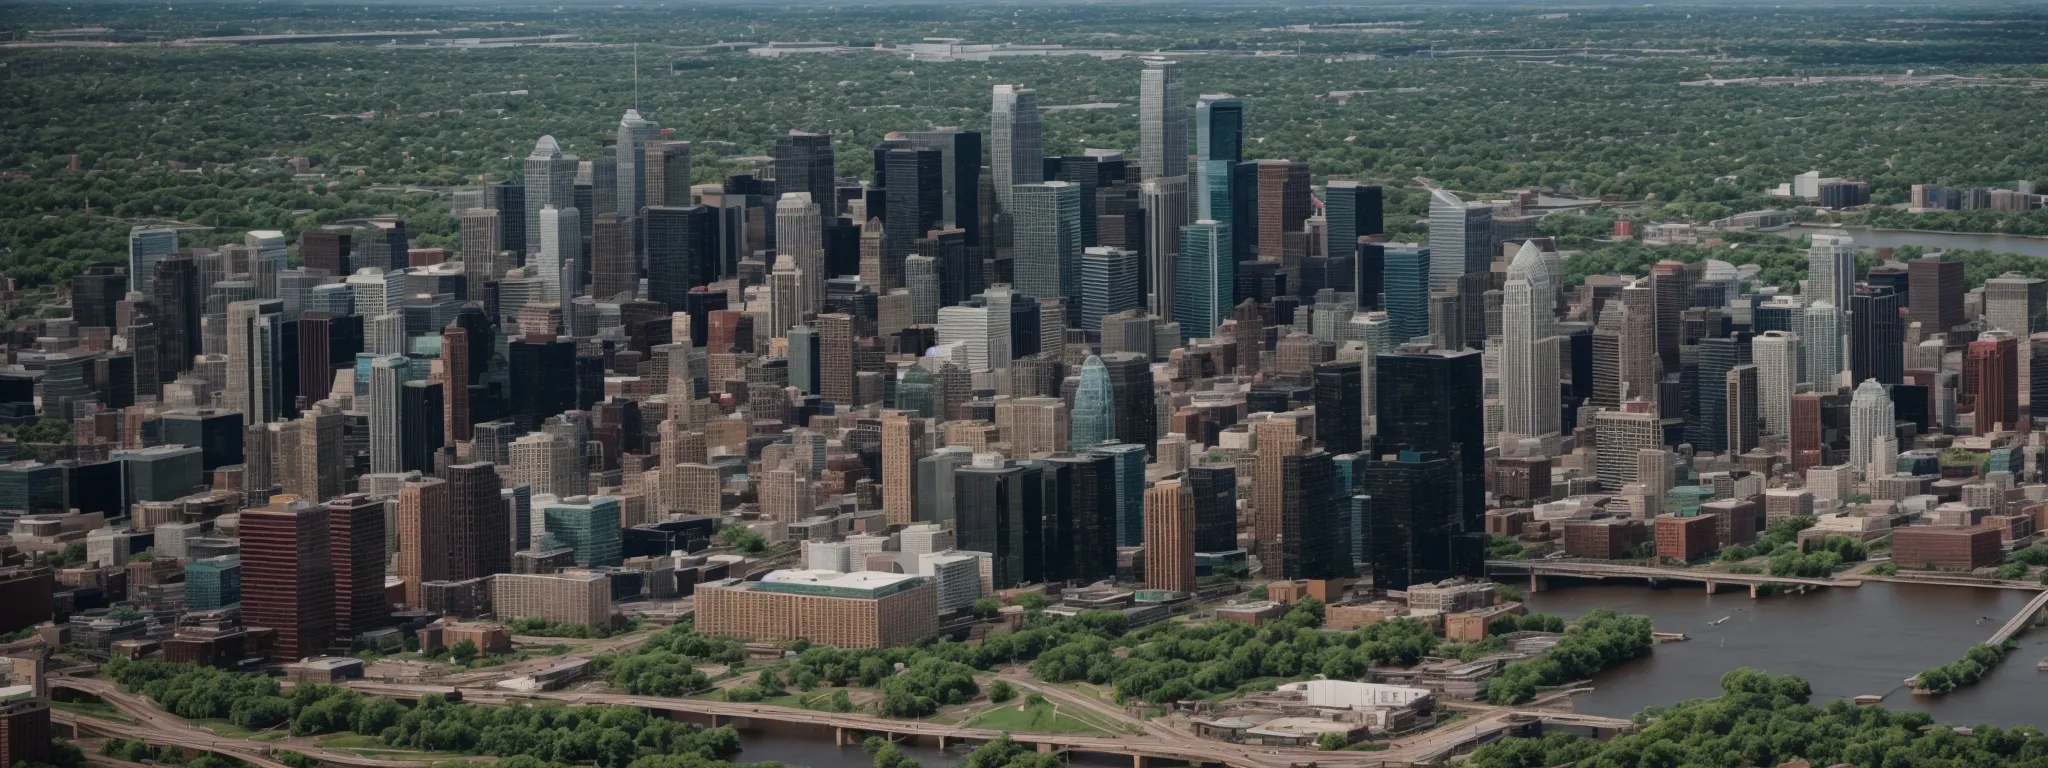 a panoramic view of minneapolis skyline illustrating the digital growth potential within the city.